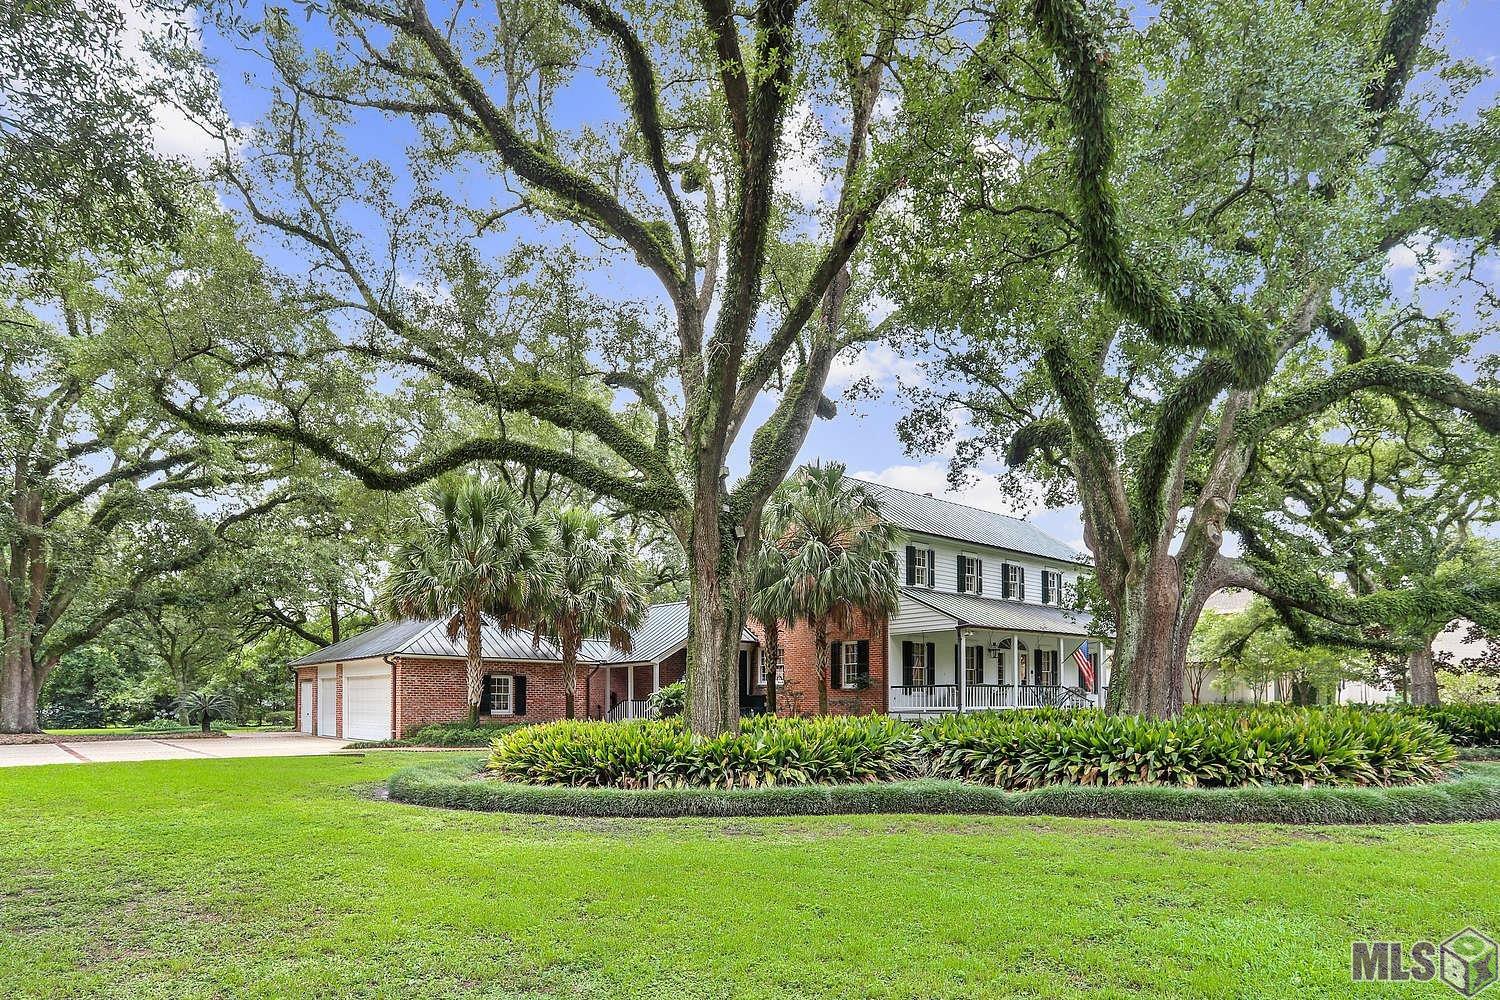 This Al Jones special one-of-a-kind home is sheltered behind majestic oak trees and is located on a prime 1.69 acres. This home exudes elegance and charm! It is rare to find location, a fabulous setting, and the perfect home all in one! Renovations and updating throughout, including a remodel of the kitchen opening up architecturally to accommodate todays living style. This classic home has a lot of space, with a formal dining room, living room, large kitchen/keeping/breakfast, primary suite with two baths, and three bedrooms upstairs. There are beautiful Antique pine floors, Antique New Orleans tan brick floors, and Antique pine beams in the kitchen/keeping area. The extensive “Steel Burden” style landscaping, Pennsylvania blue stone hardscape, a large fountain with a “Pan” statue, an architecturally designed Pavilion built for entertaining and to view the beautiful grounds, copper lighting, and sprinkler system adds to the amazing ambience. To greet your guest there is a brick wall, with six copper lights, at the entrance with guest parking, creating night time drama. The roof, gutters, and lighting are copper. A whole house generator, three car garage, 185 ft asphalt drive parking area, and so much more! Extensive Amenity List, survey, floor plan, and Baton Rouge health district map are available.